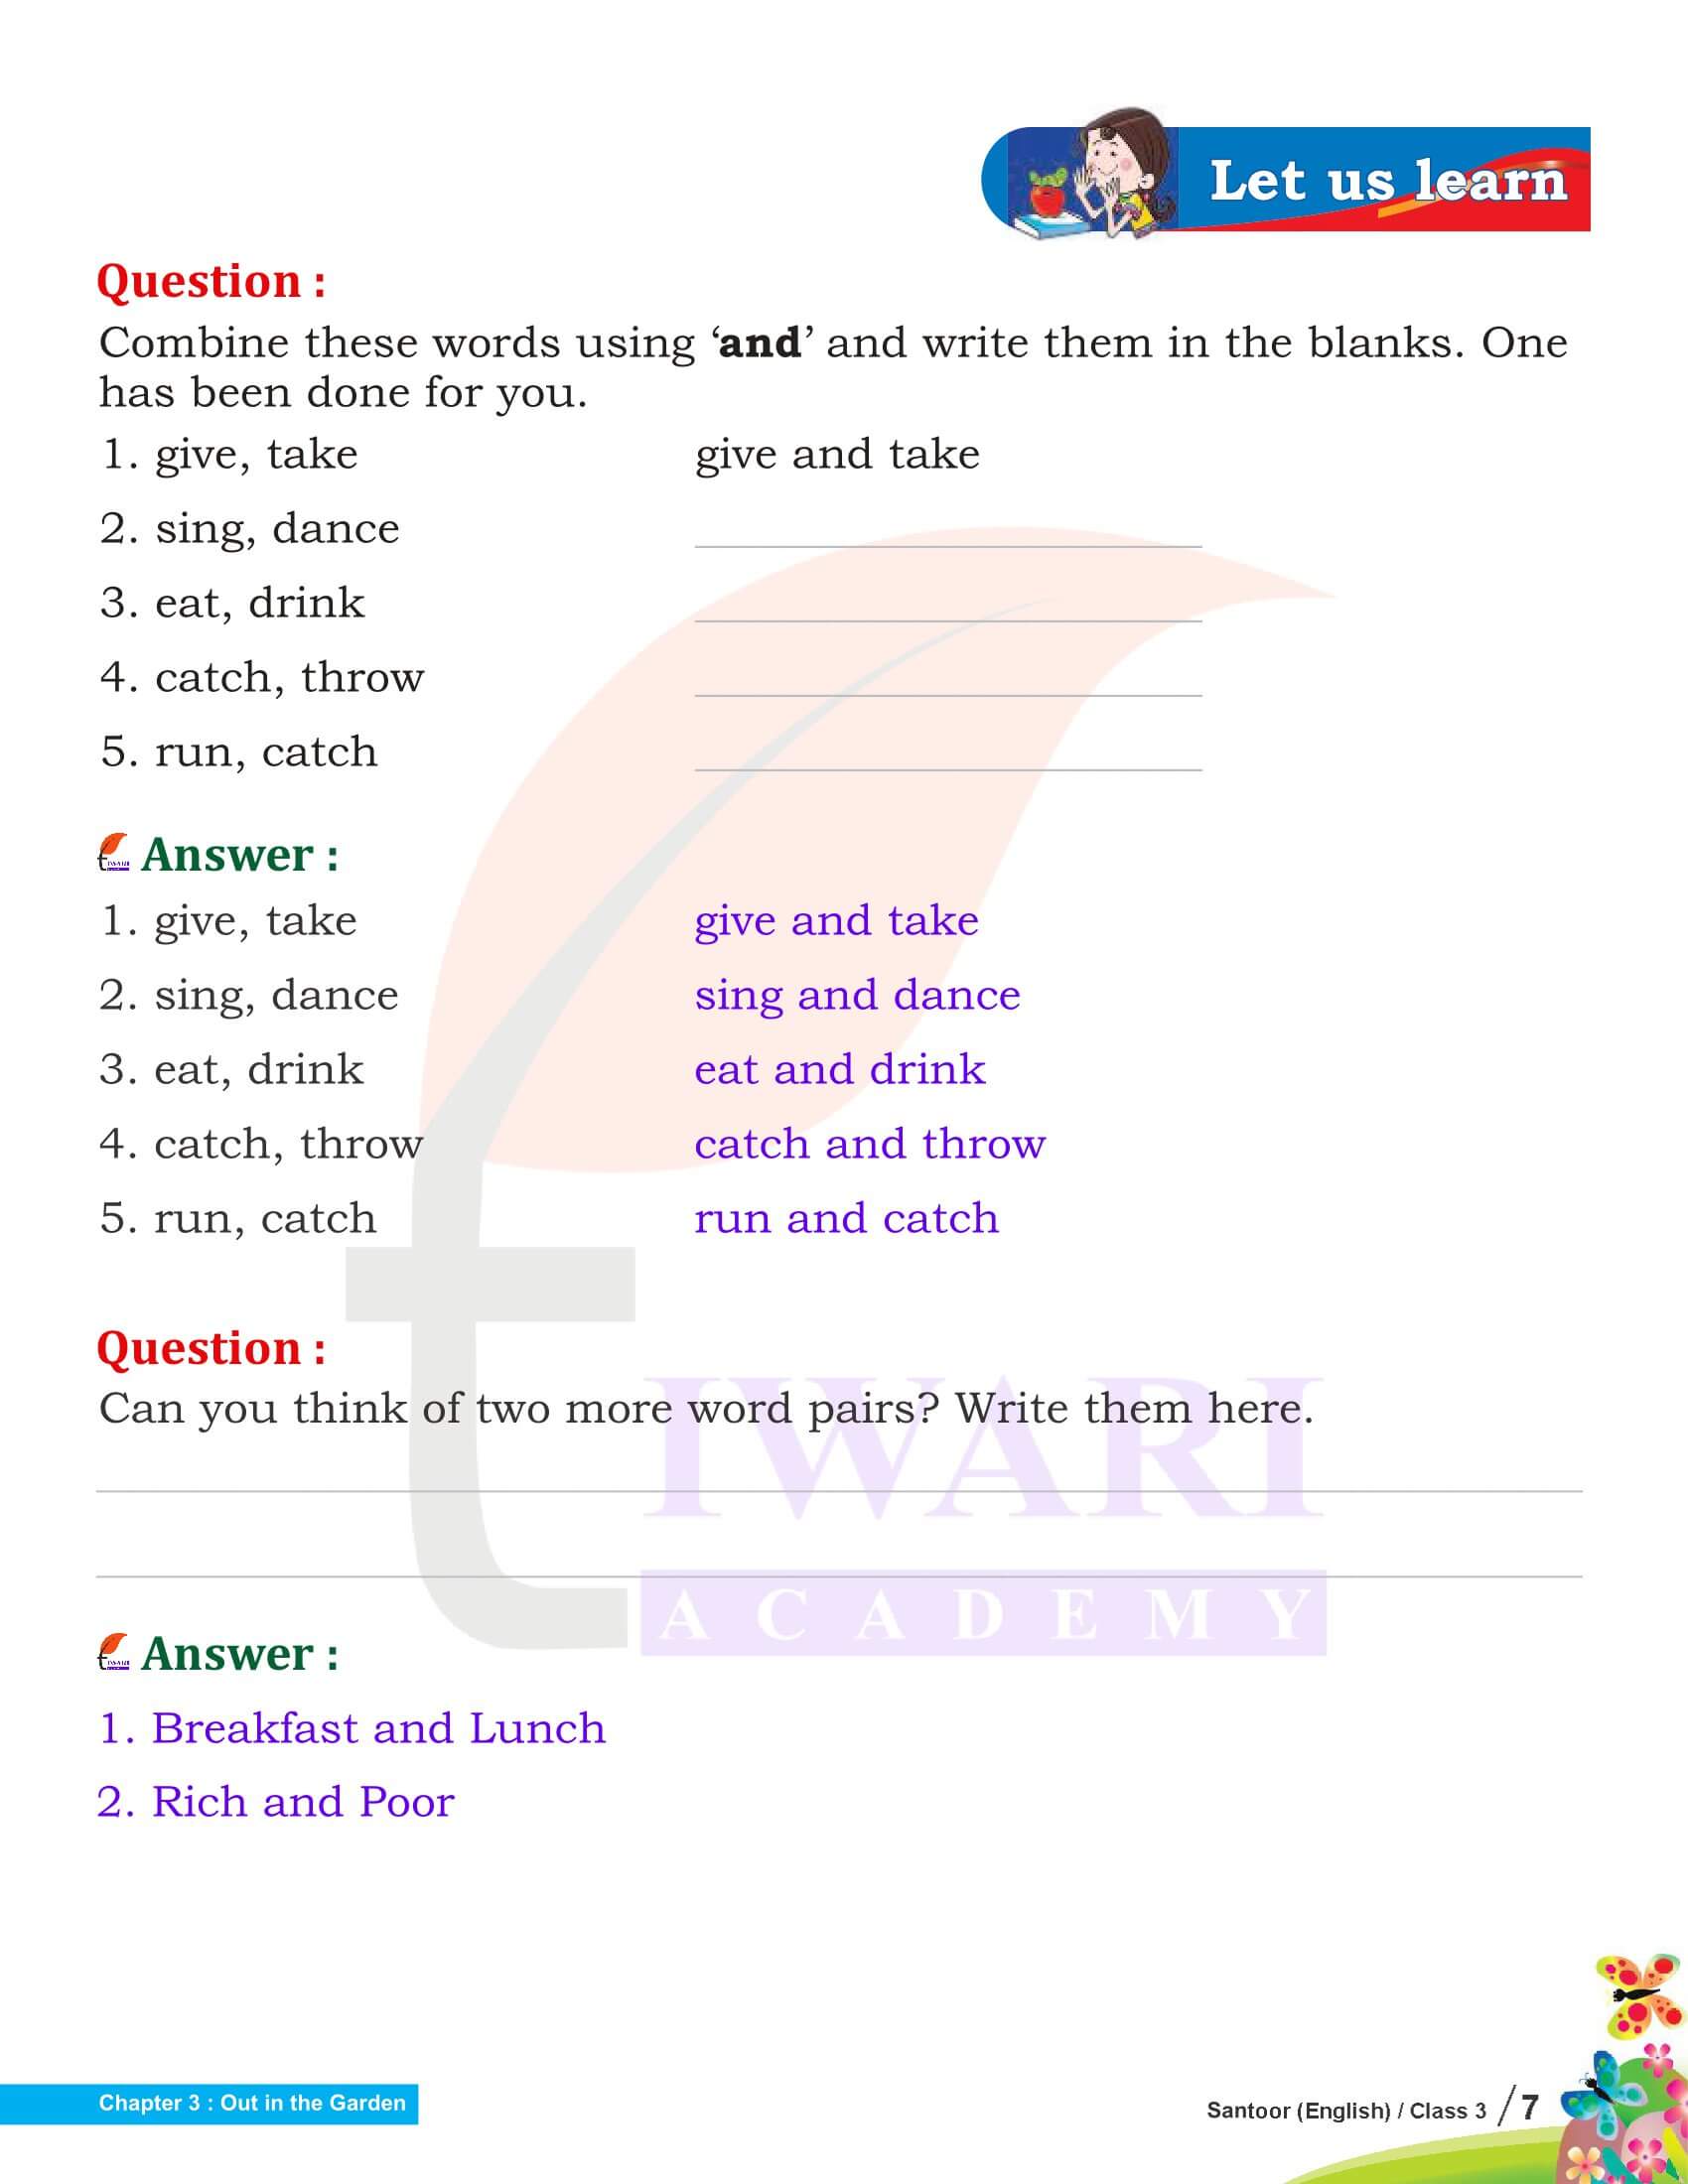 NCERT Solutions for Class 3 English Santoor Chapter 4 Answers